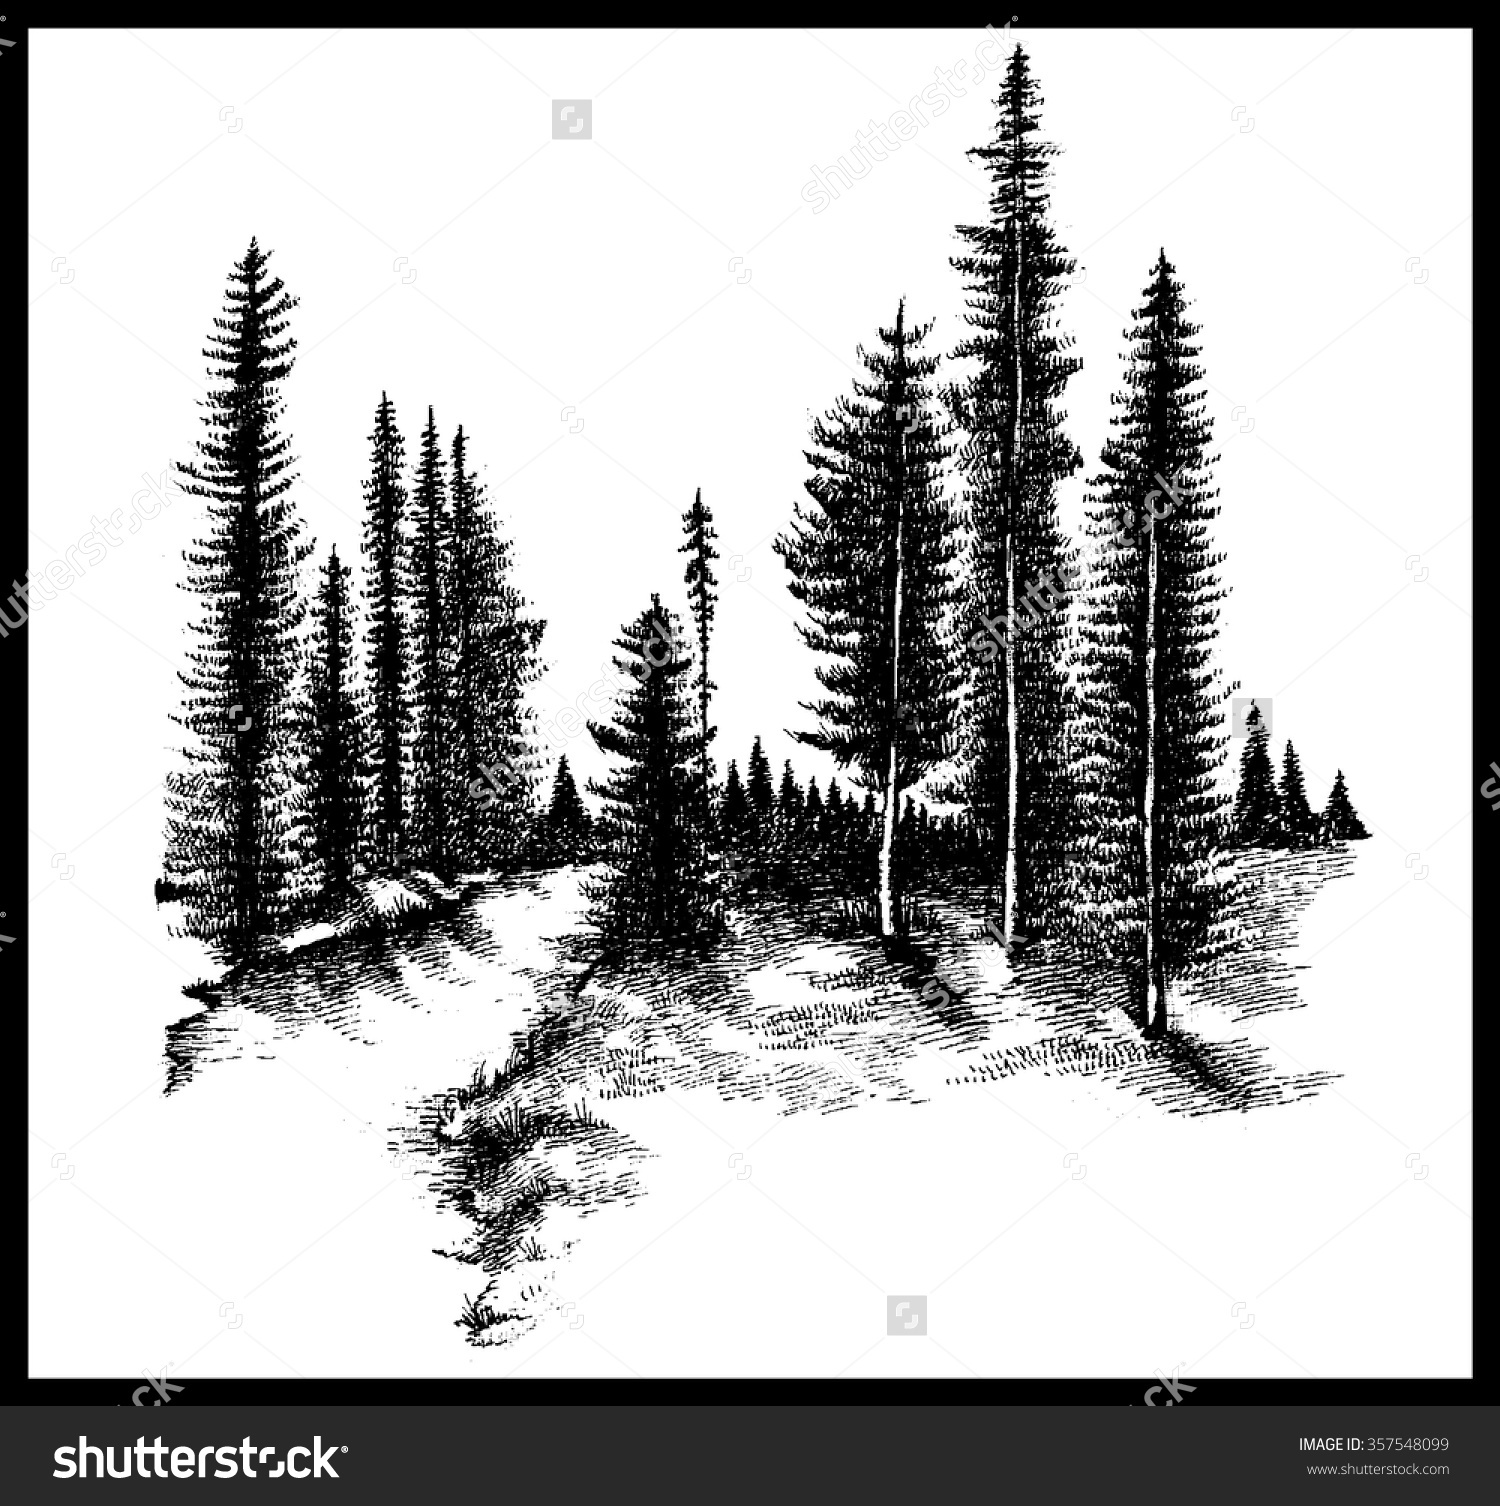 Pine tree forest clipart black and white